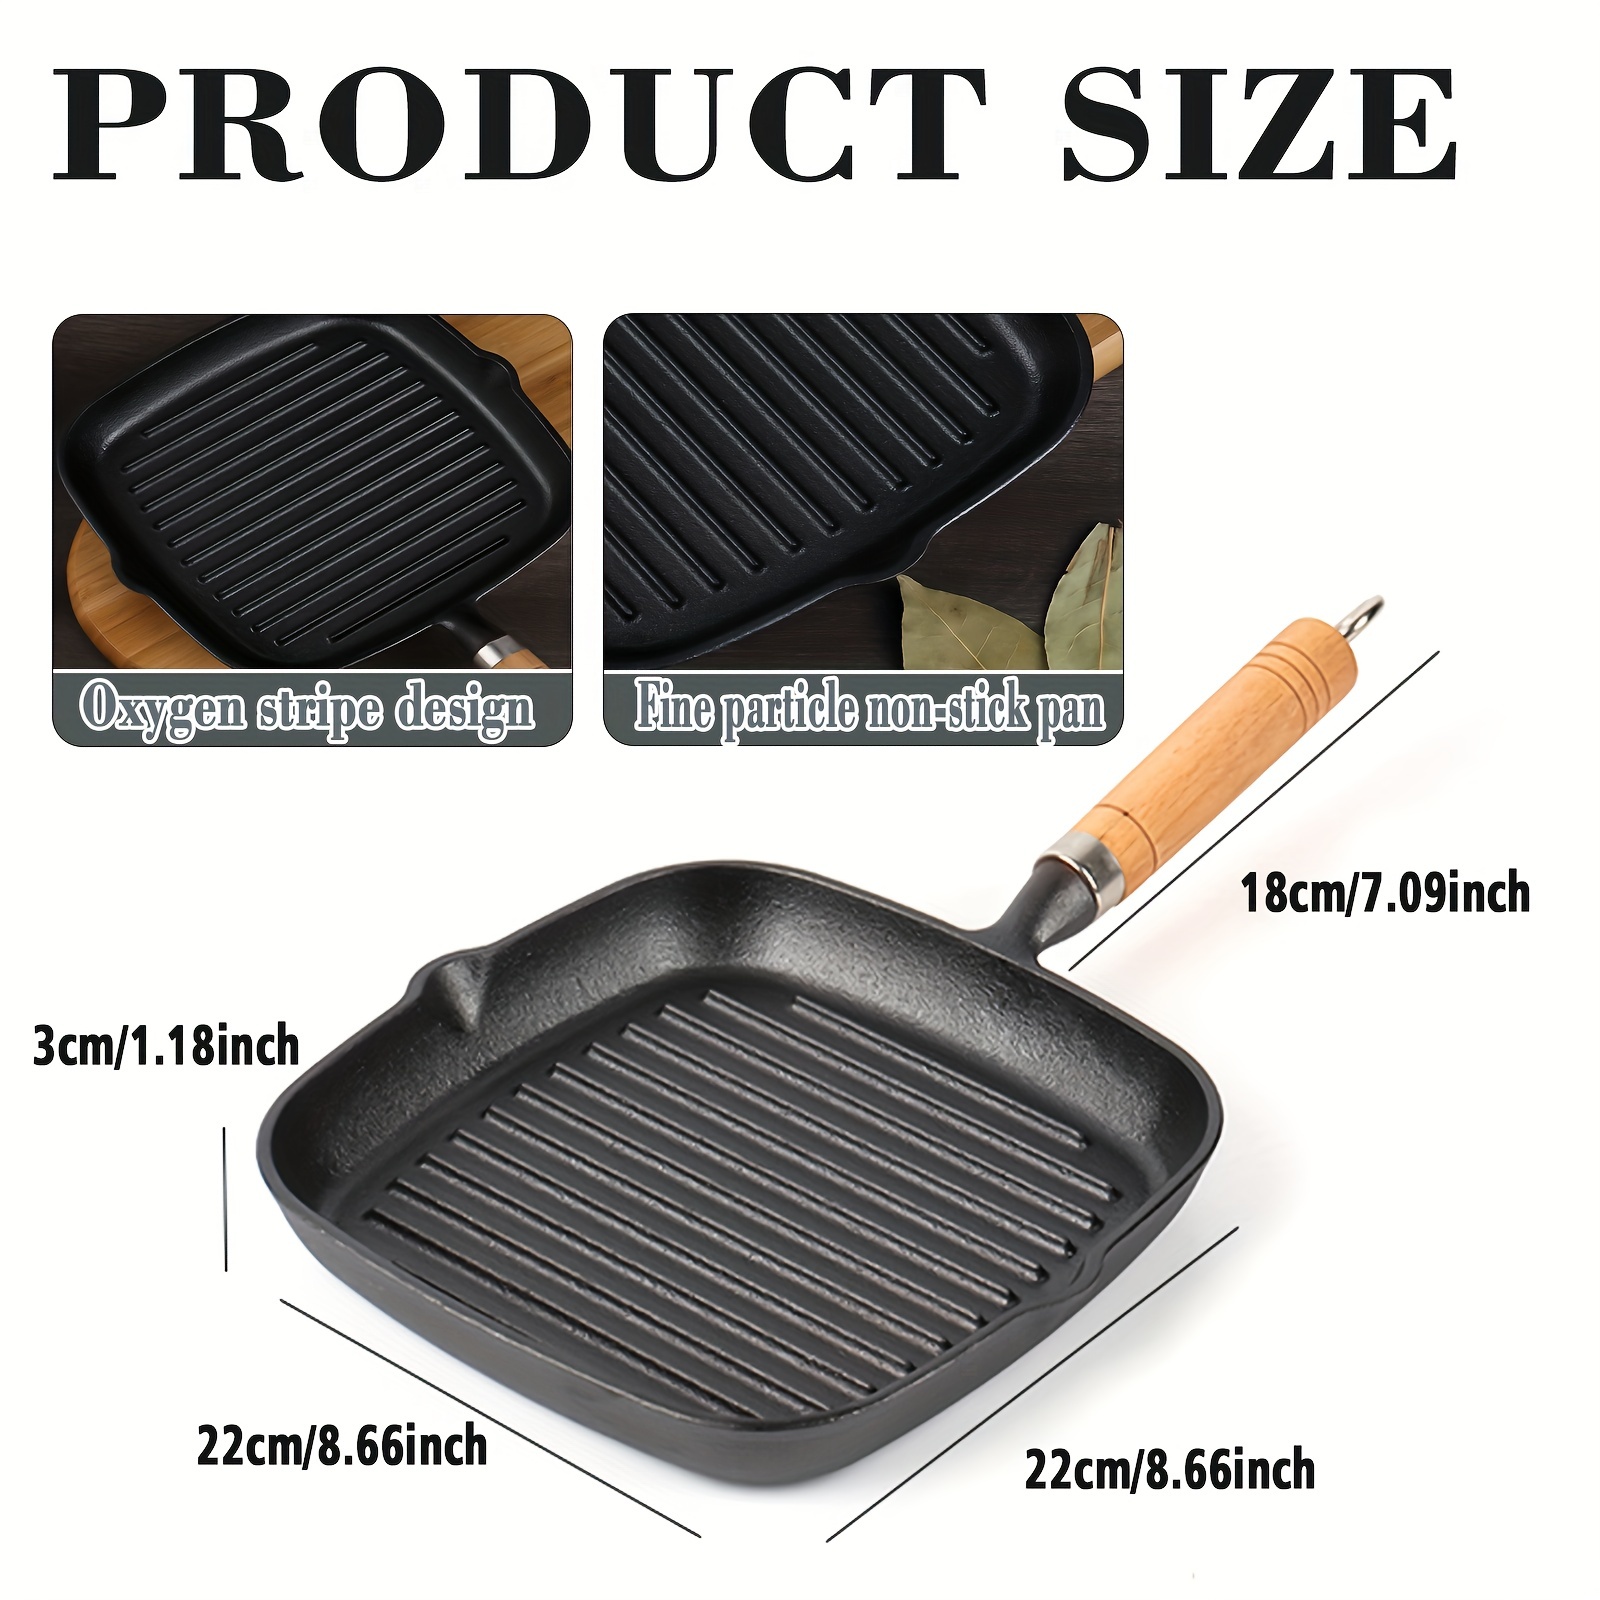 1pc Non-electric Folding Handle Steak Frying Pan, Suitable For Frying Steaks,  Eggs, Grilled Chicken Wings And Patties, And Suitable For Use On Induction  Cookers, Electric Ceramic Stoves, Gas Stoves And Charcoal Stoves.